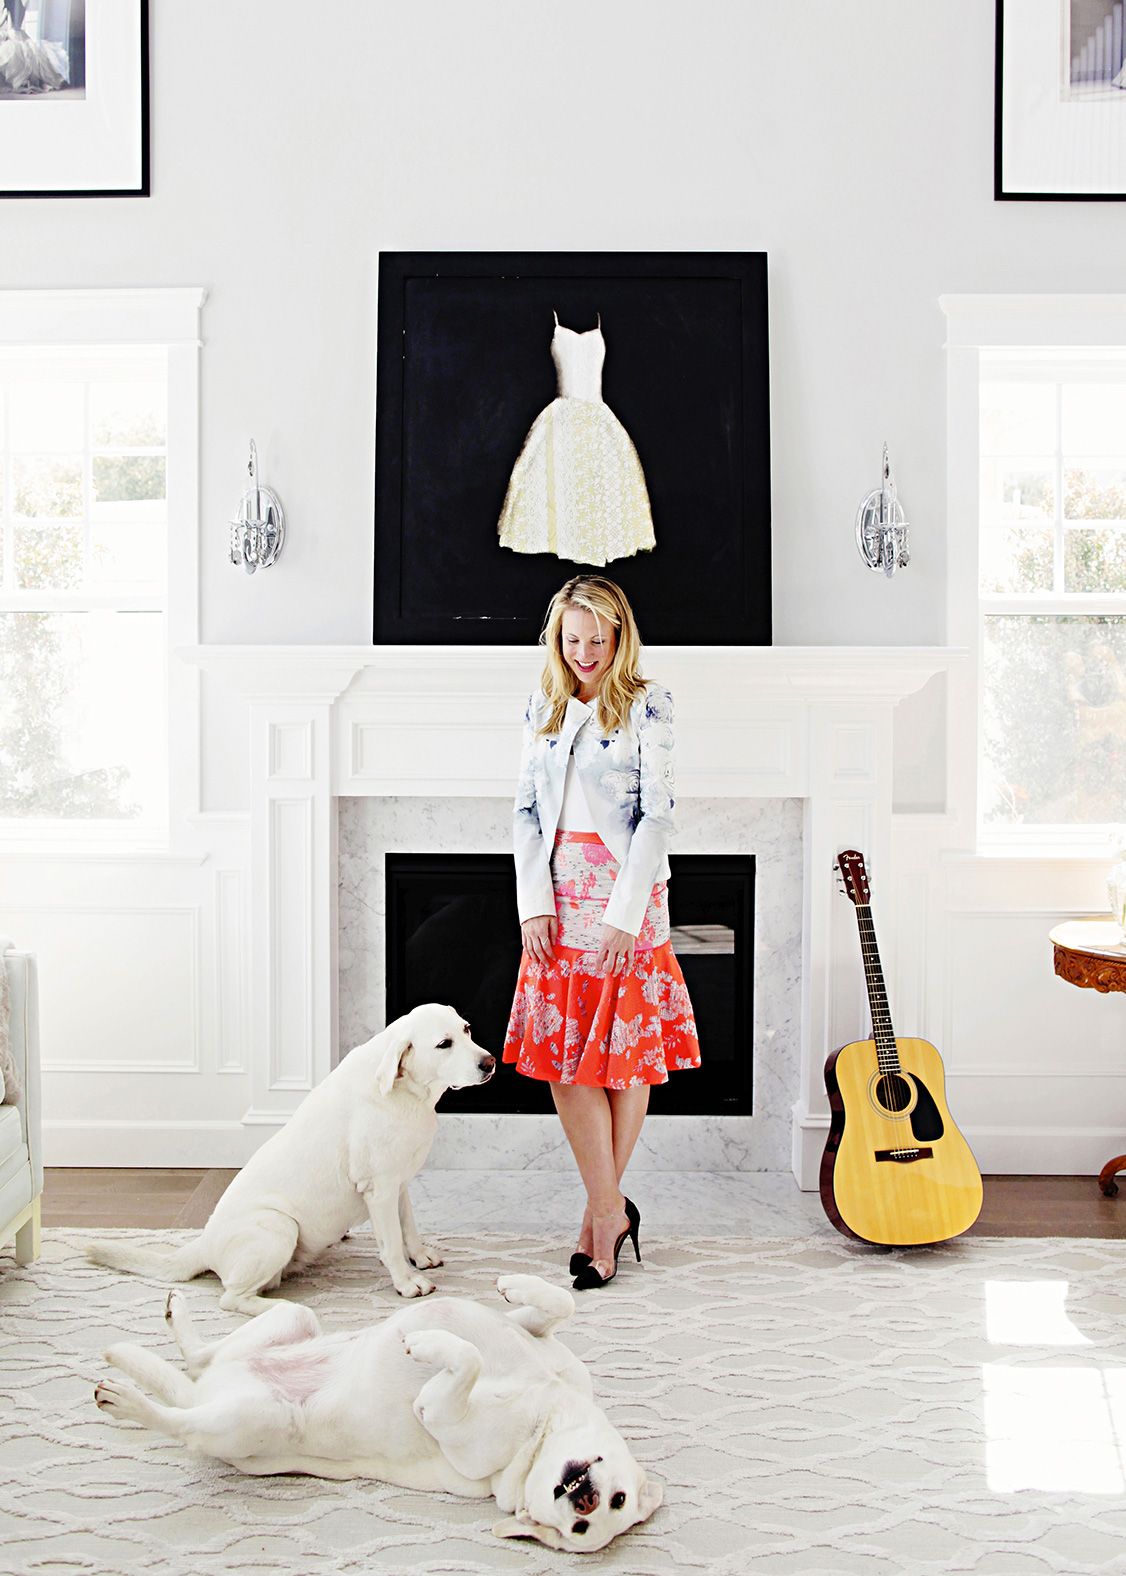 Vibrant environmental portrait by Kimberly Genevieve: A lady radiating joy with her beloved dogs in a living room setting